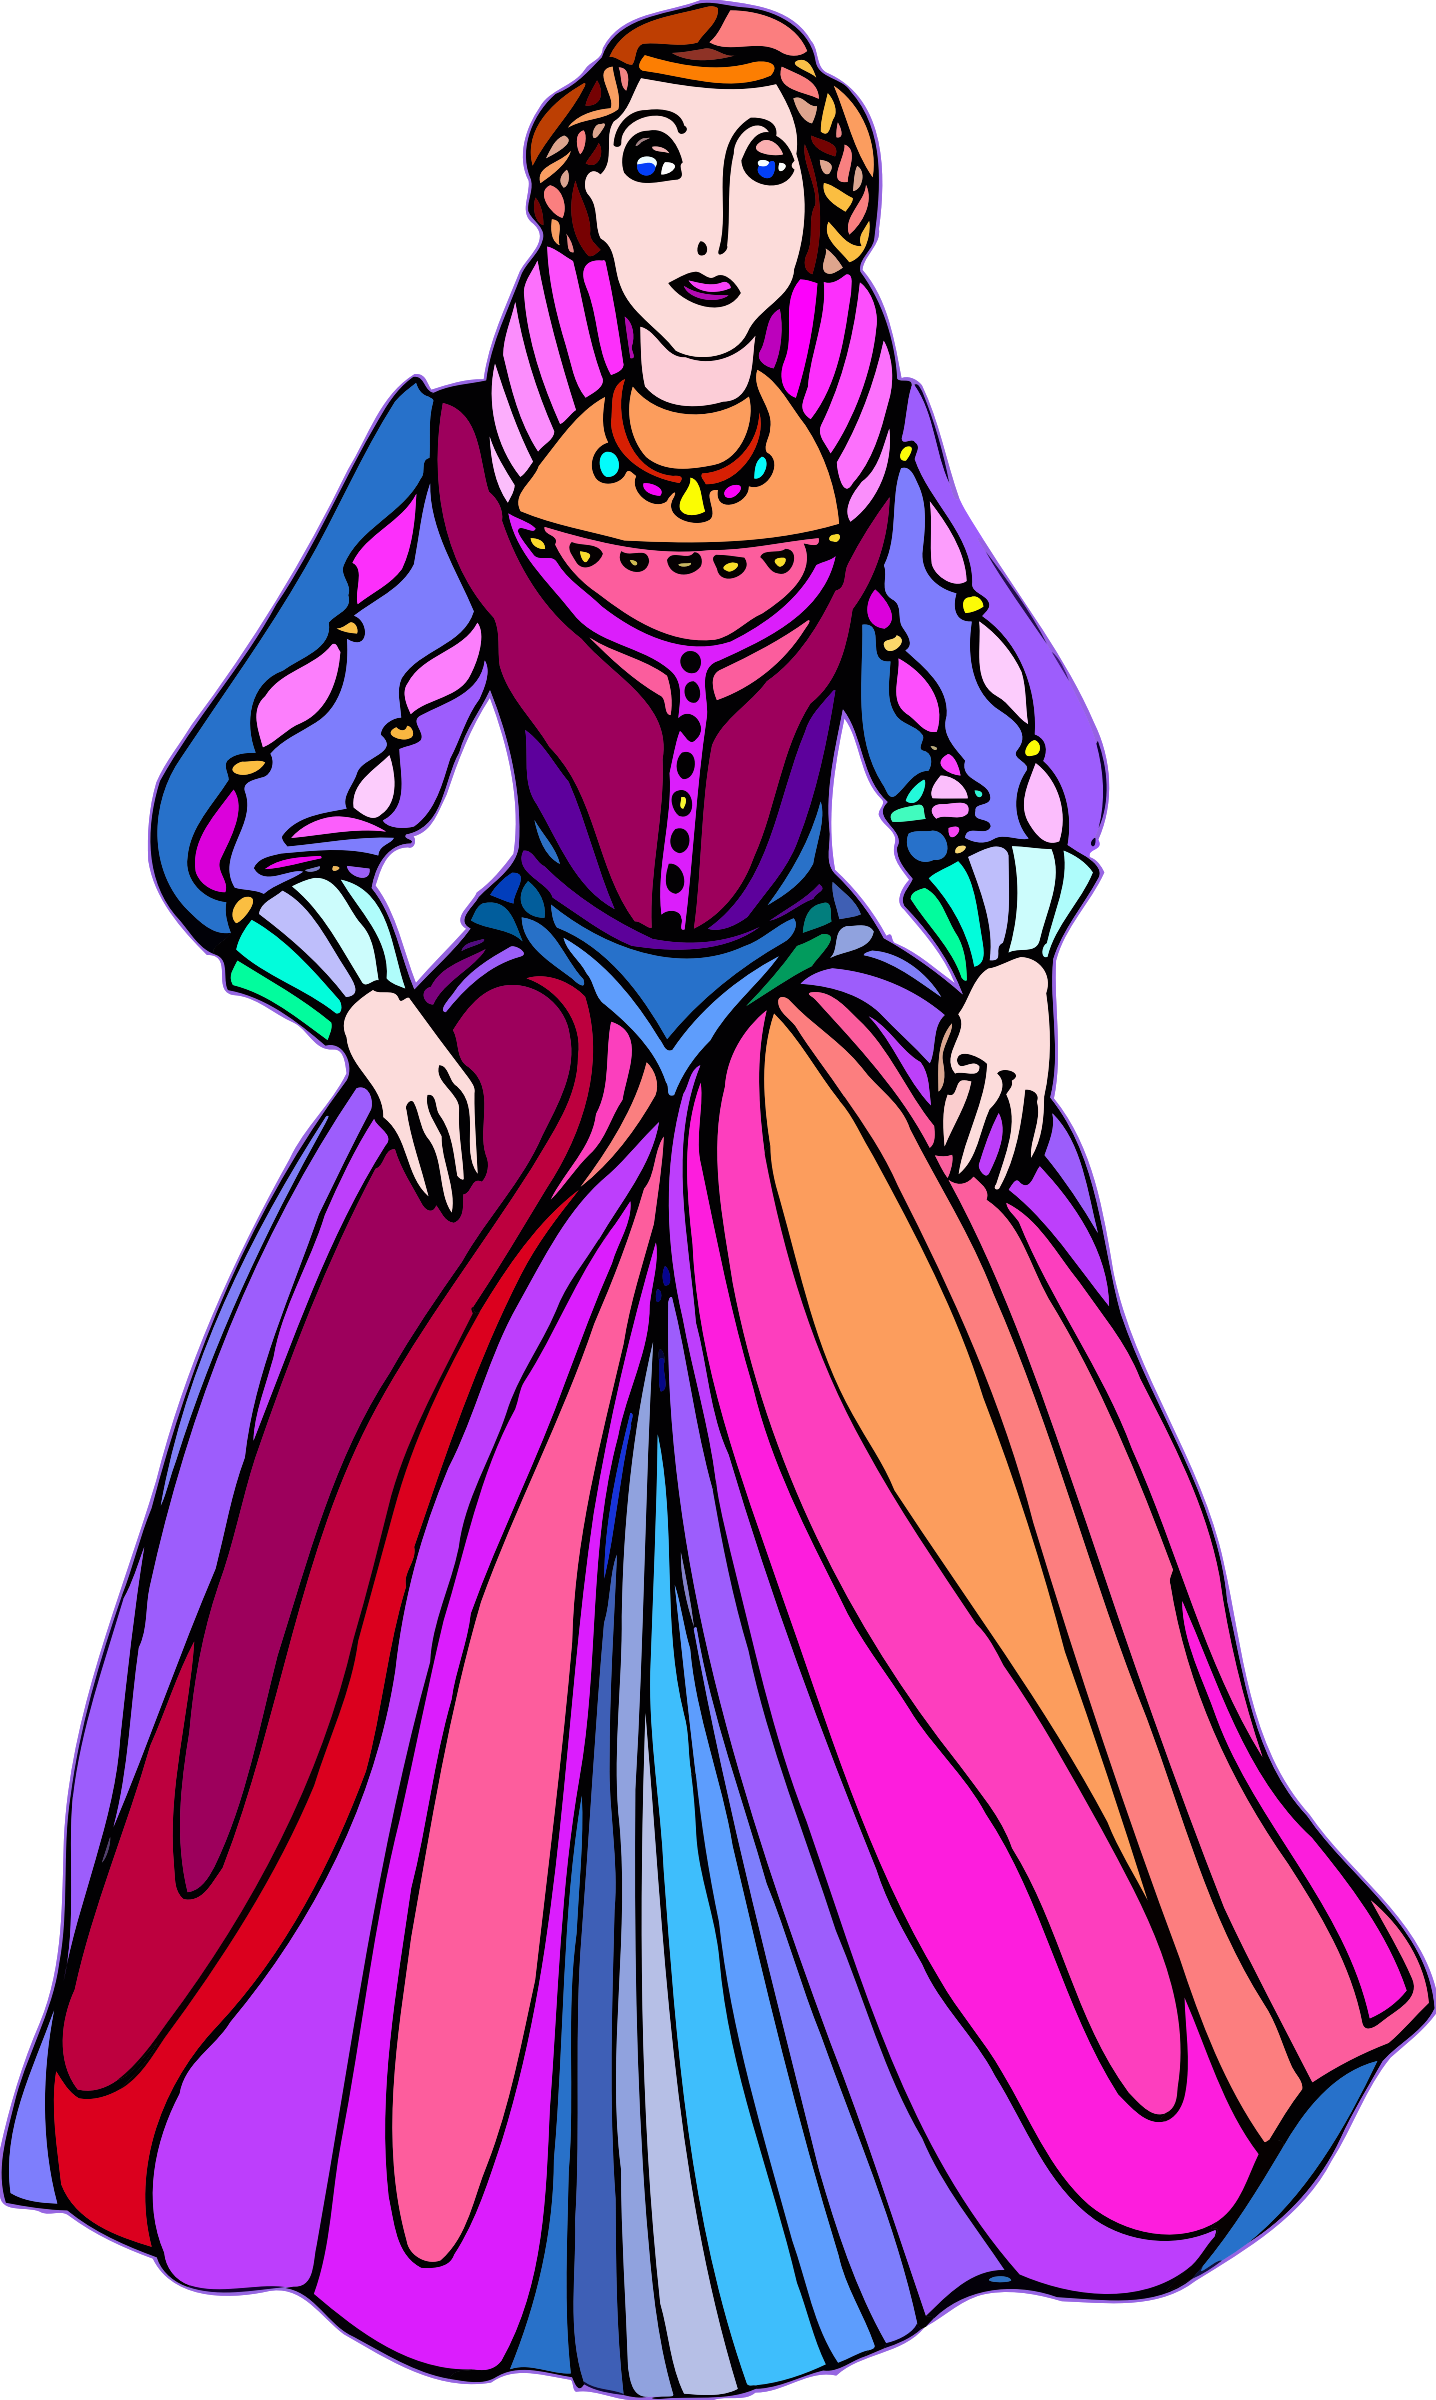 A Cartoon Of A Woman In A Colorful Dress